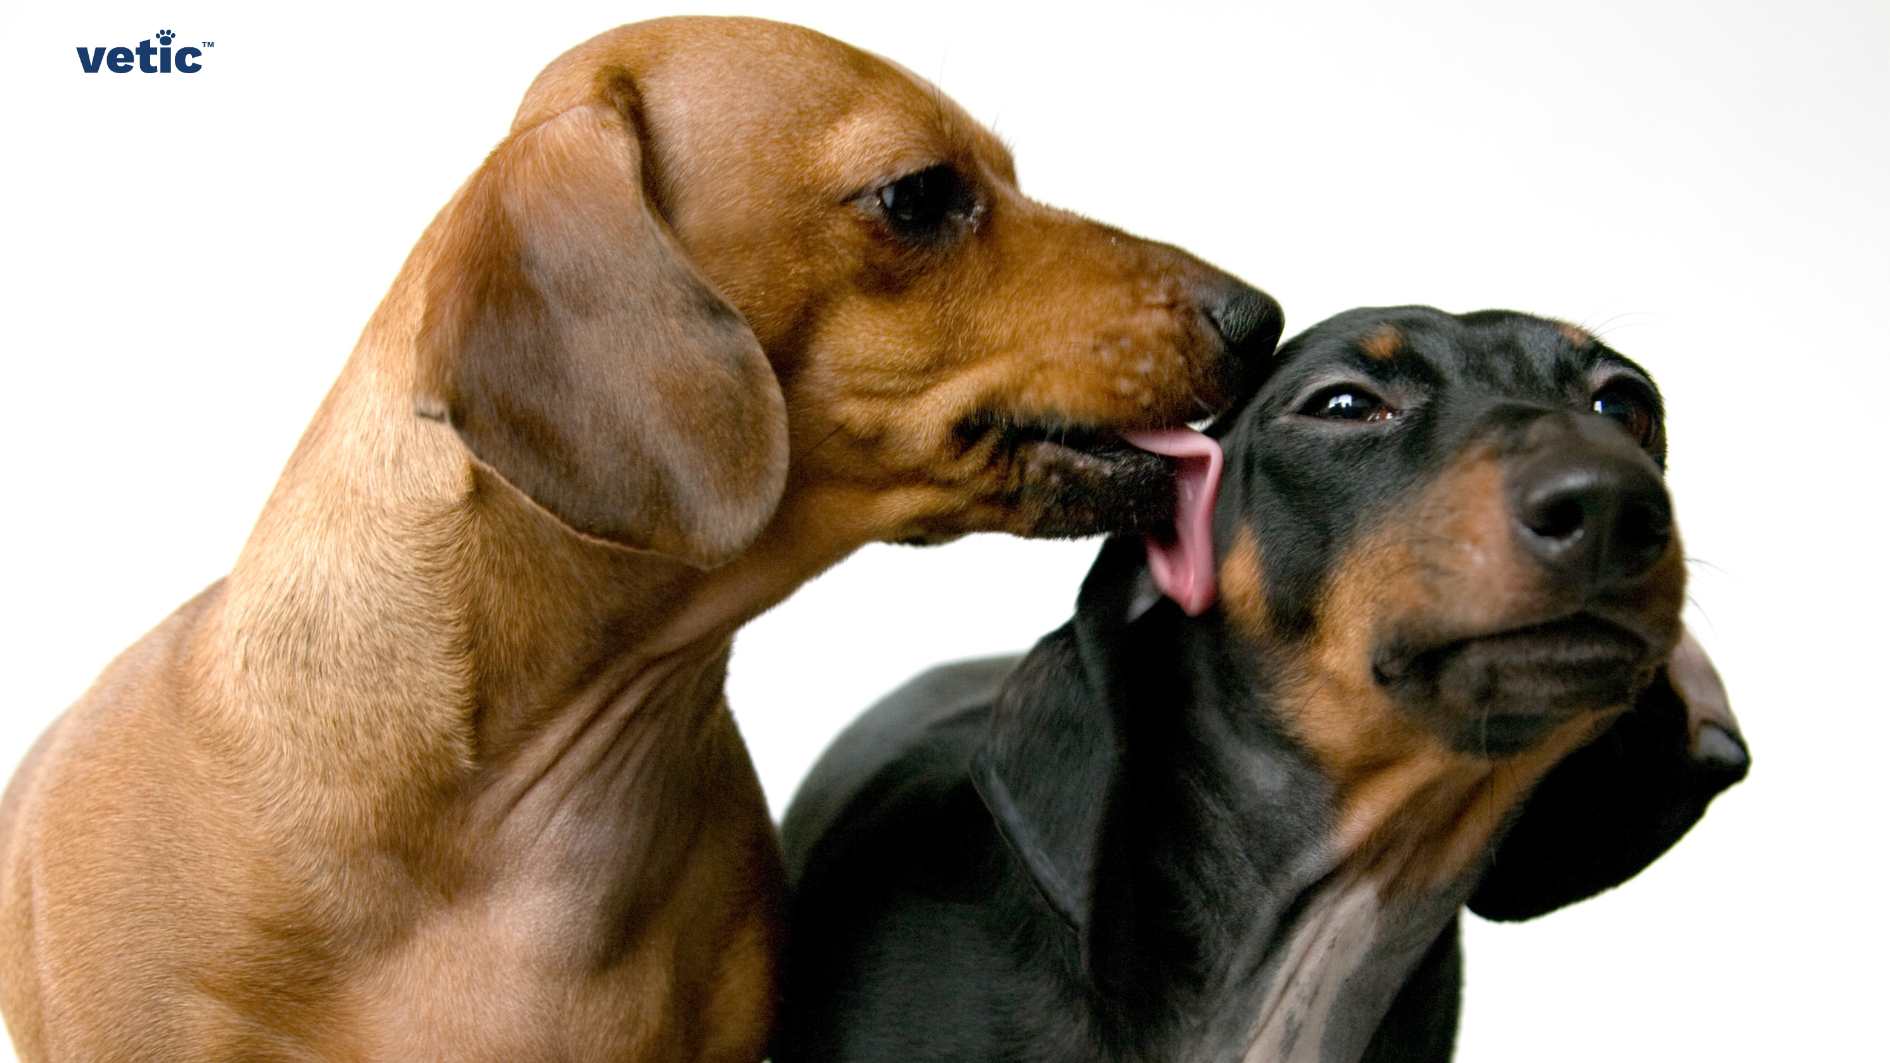 Two dogs are featured prominently in this image. It belongs to a series of images titled "Adopting a Dachshund". The dog on the left is brown with a smooth coat, medium-sized ears that fold over, and it is licking the face of the other dog. The dog being licked has black fur with tan markings on its face and ears; its expression appears surprised or caught off-guard. Both dogs are set against a plain white background which highlights their forms and colors. In the top left corner, there’s a logo with the text “vetic.”